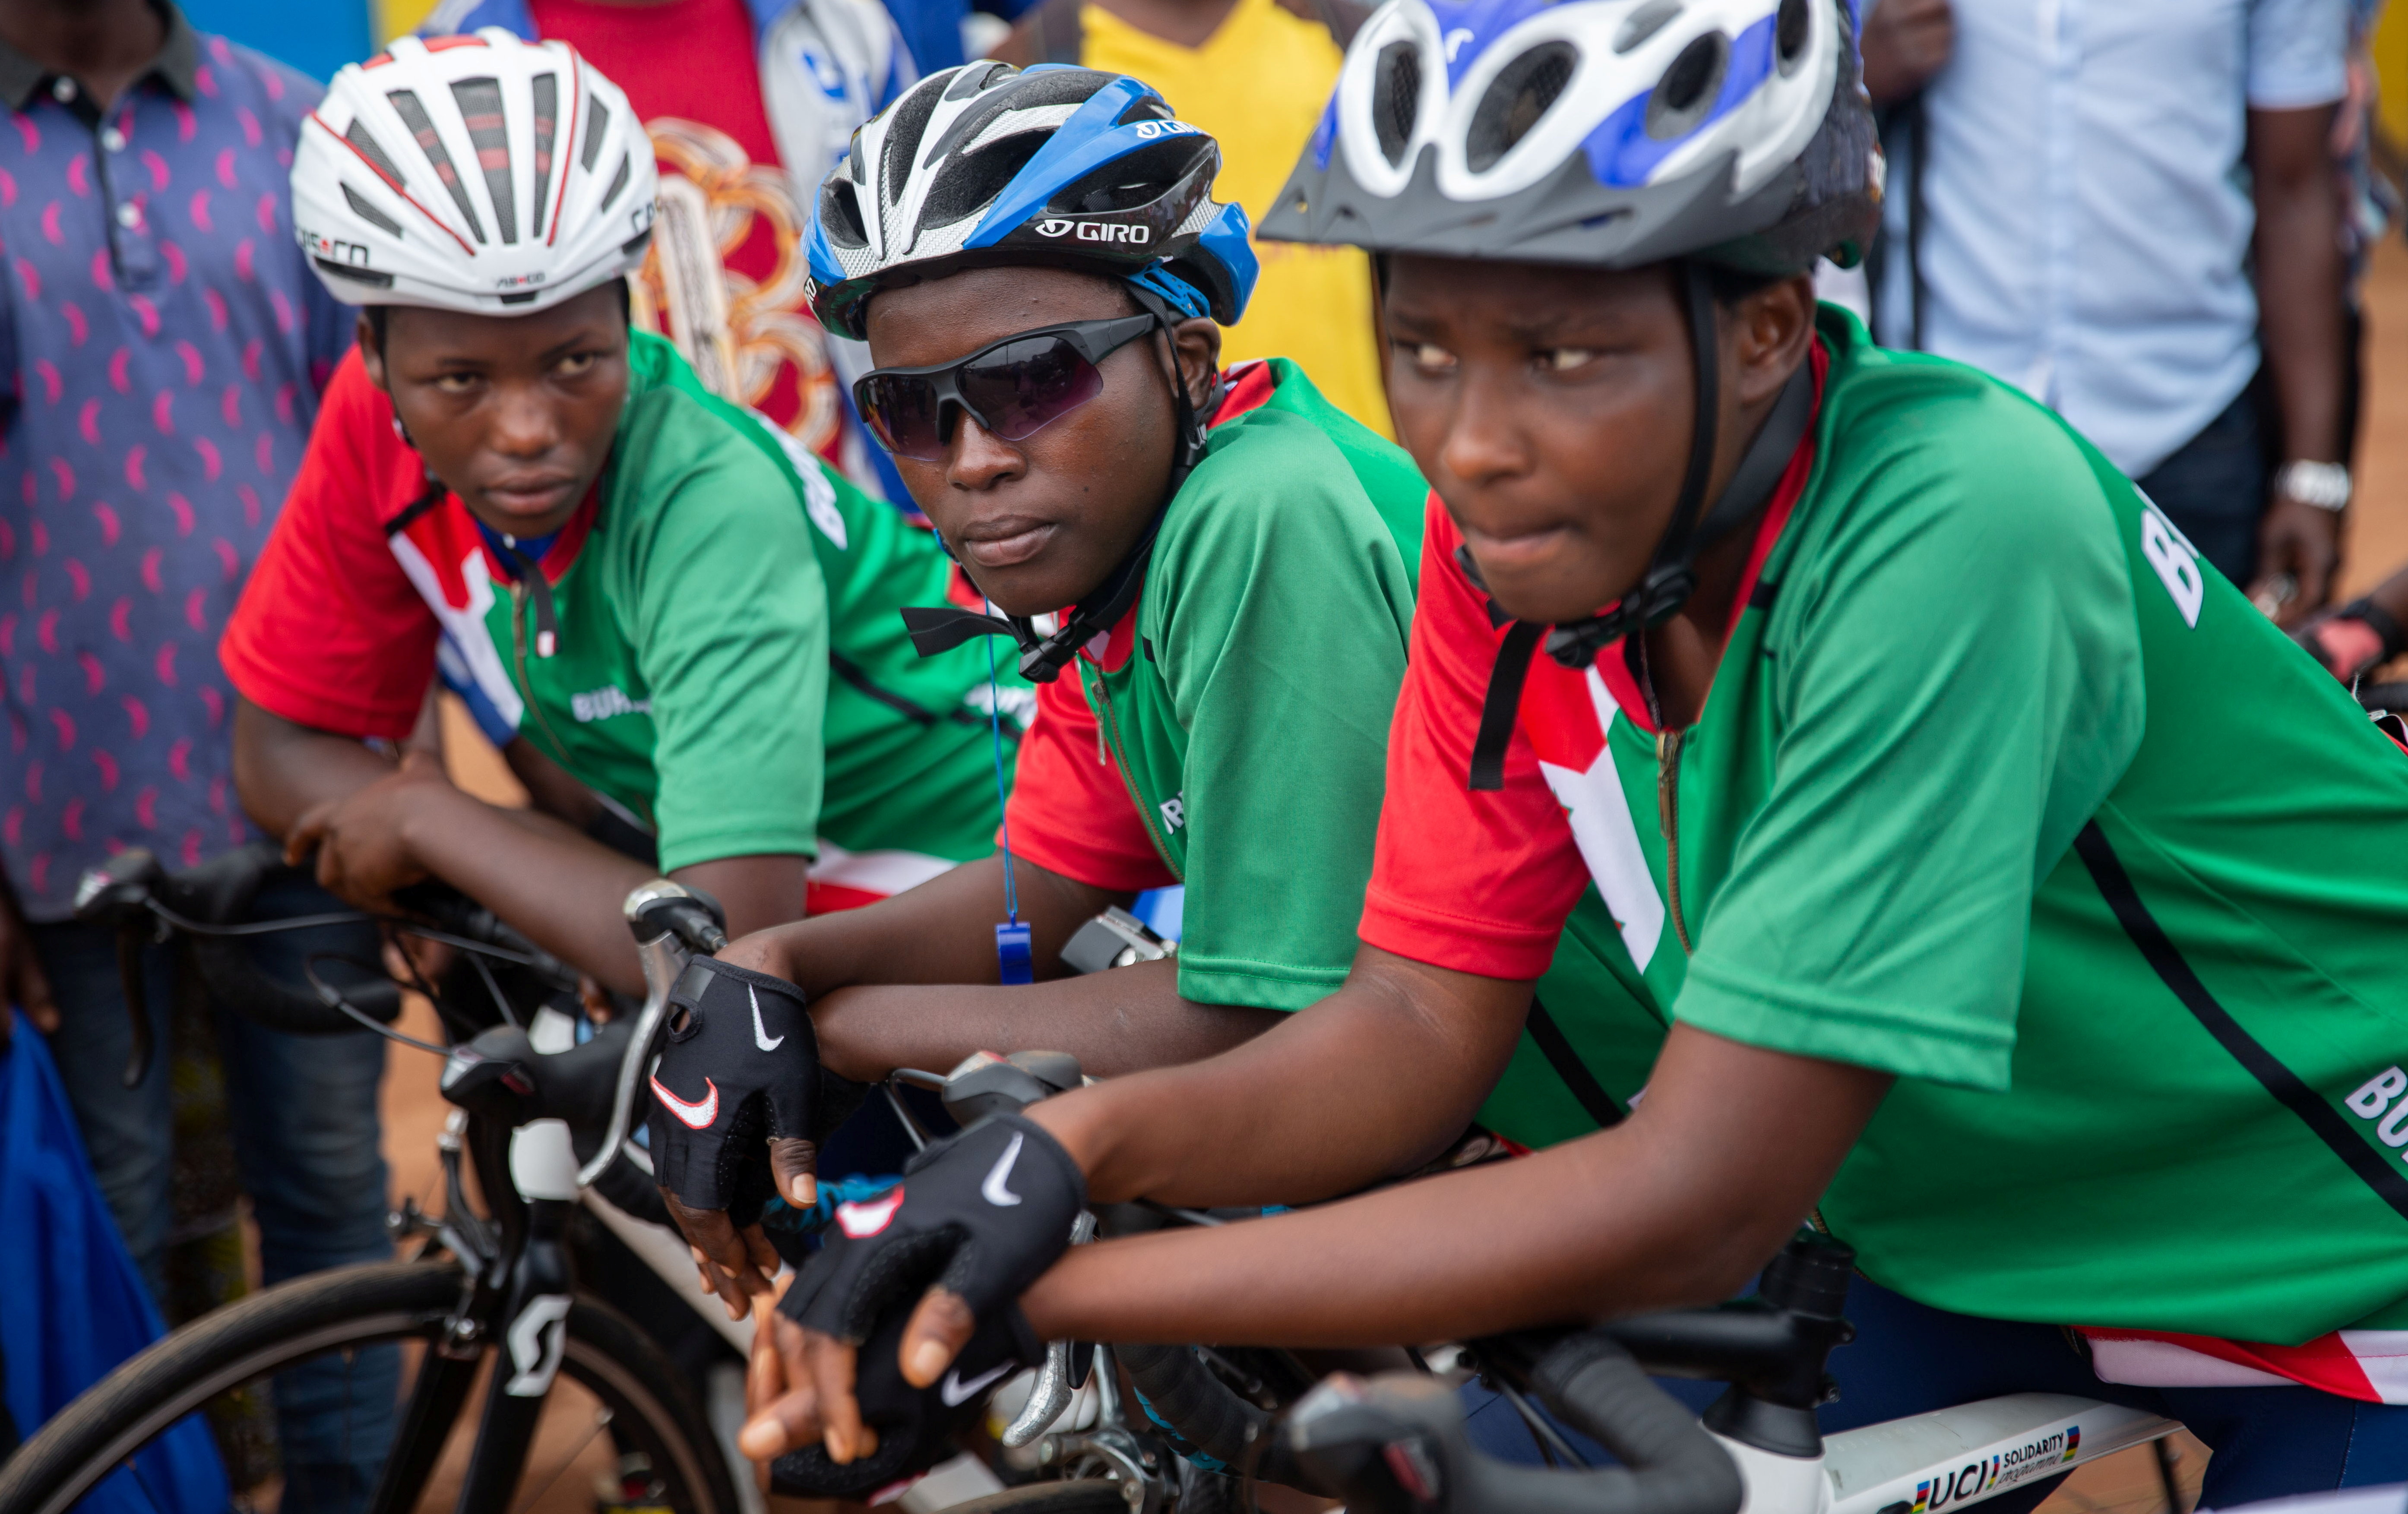 Delphine Nifasha, 19, a student and a member of Burundi women's cycling team is seen with her teammates before the departure of the last race from Ngozi to Gitega during the first International Women's Cycling Tour in Ngozi, Burundi November 28, 2021. REUTERS/Evrard Ngendakumana